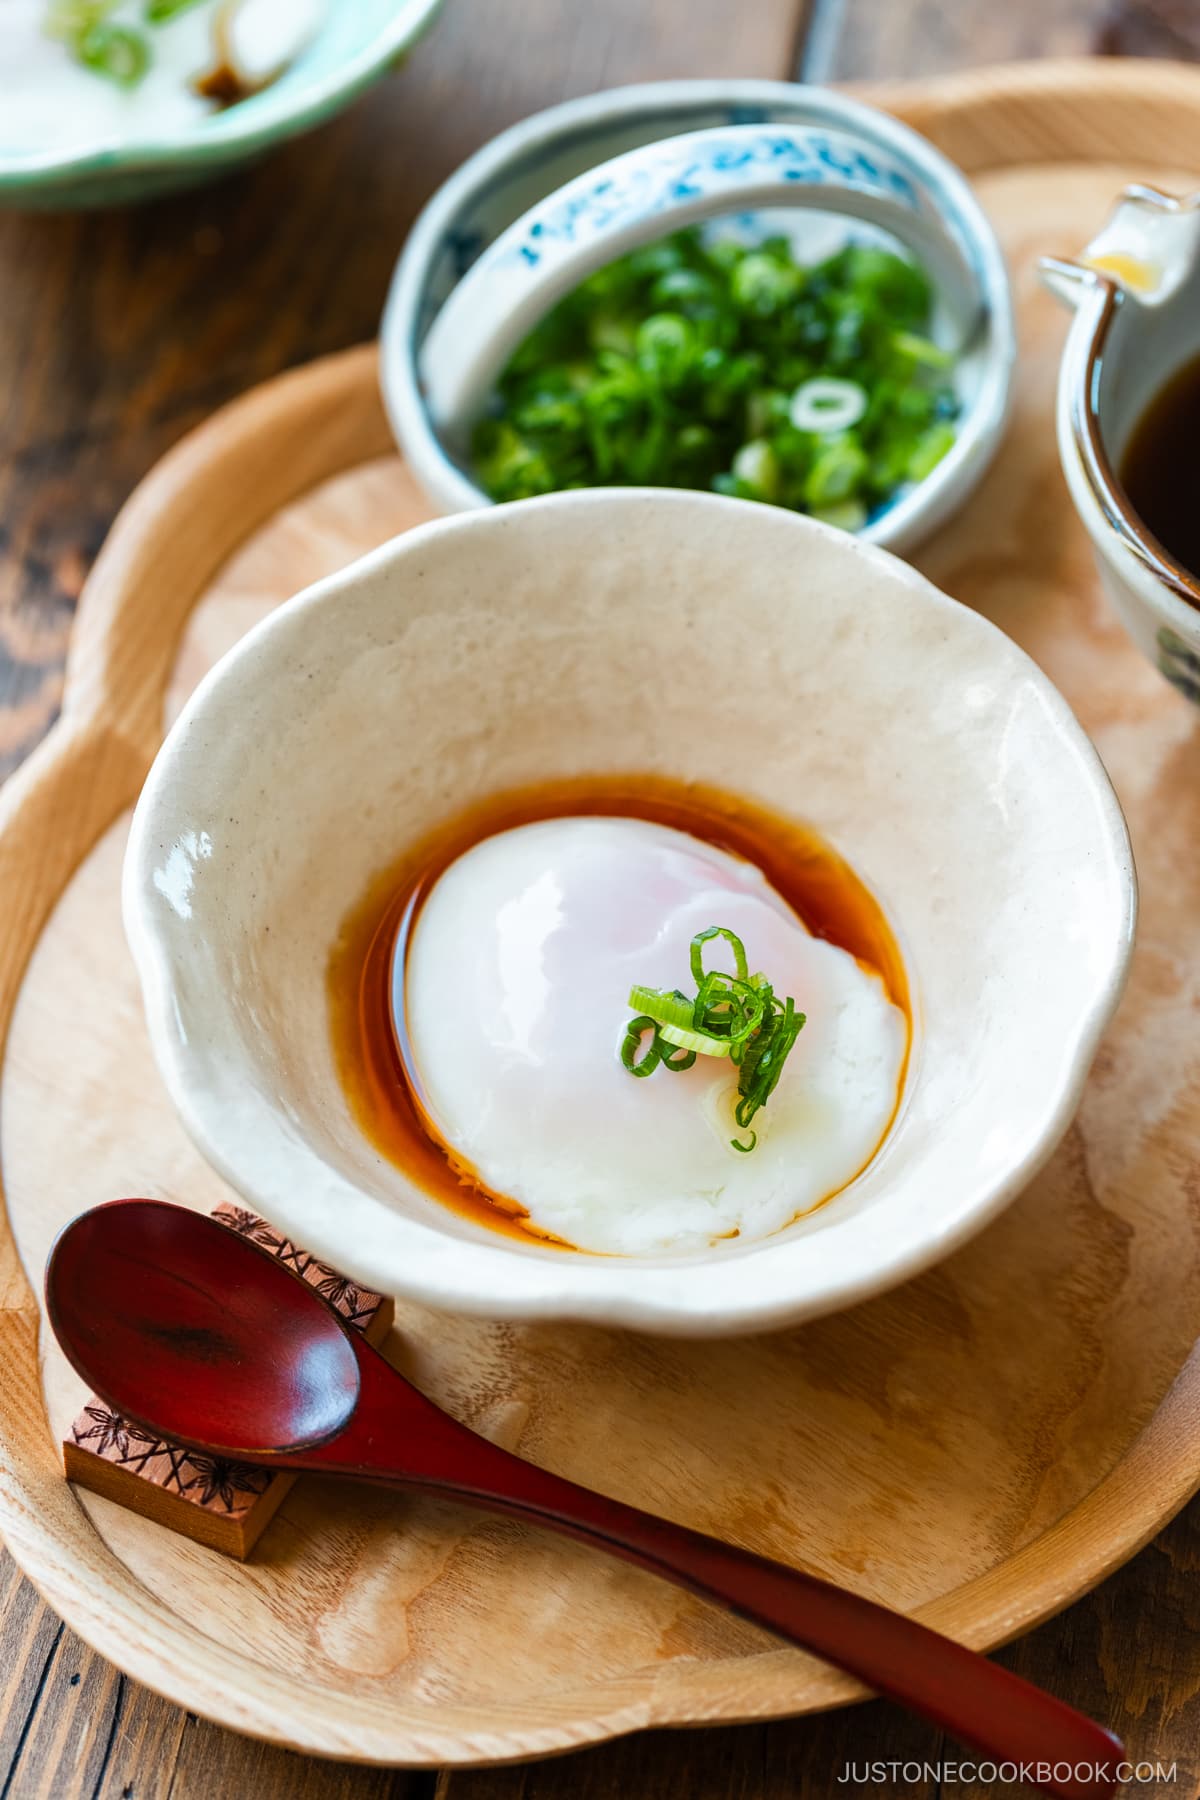 A white bowl containing Onsen Tamago (Japanese Hot Spring Egg) drizzled with dashi-based broth and garnished with sliced green onion.